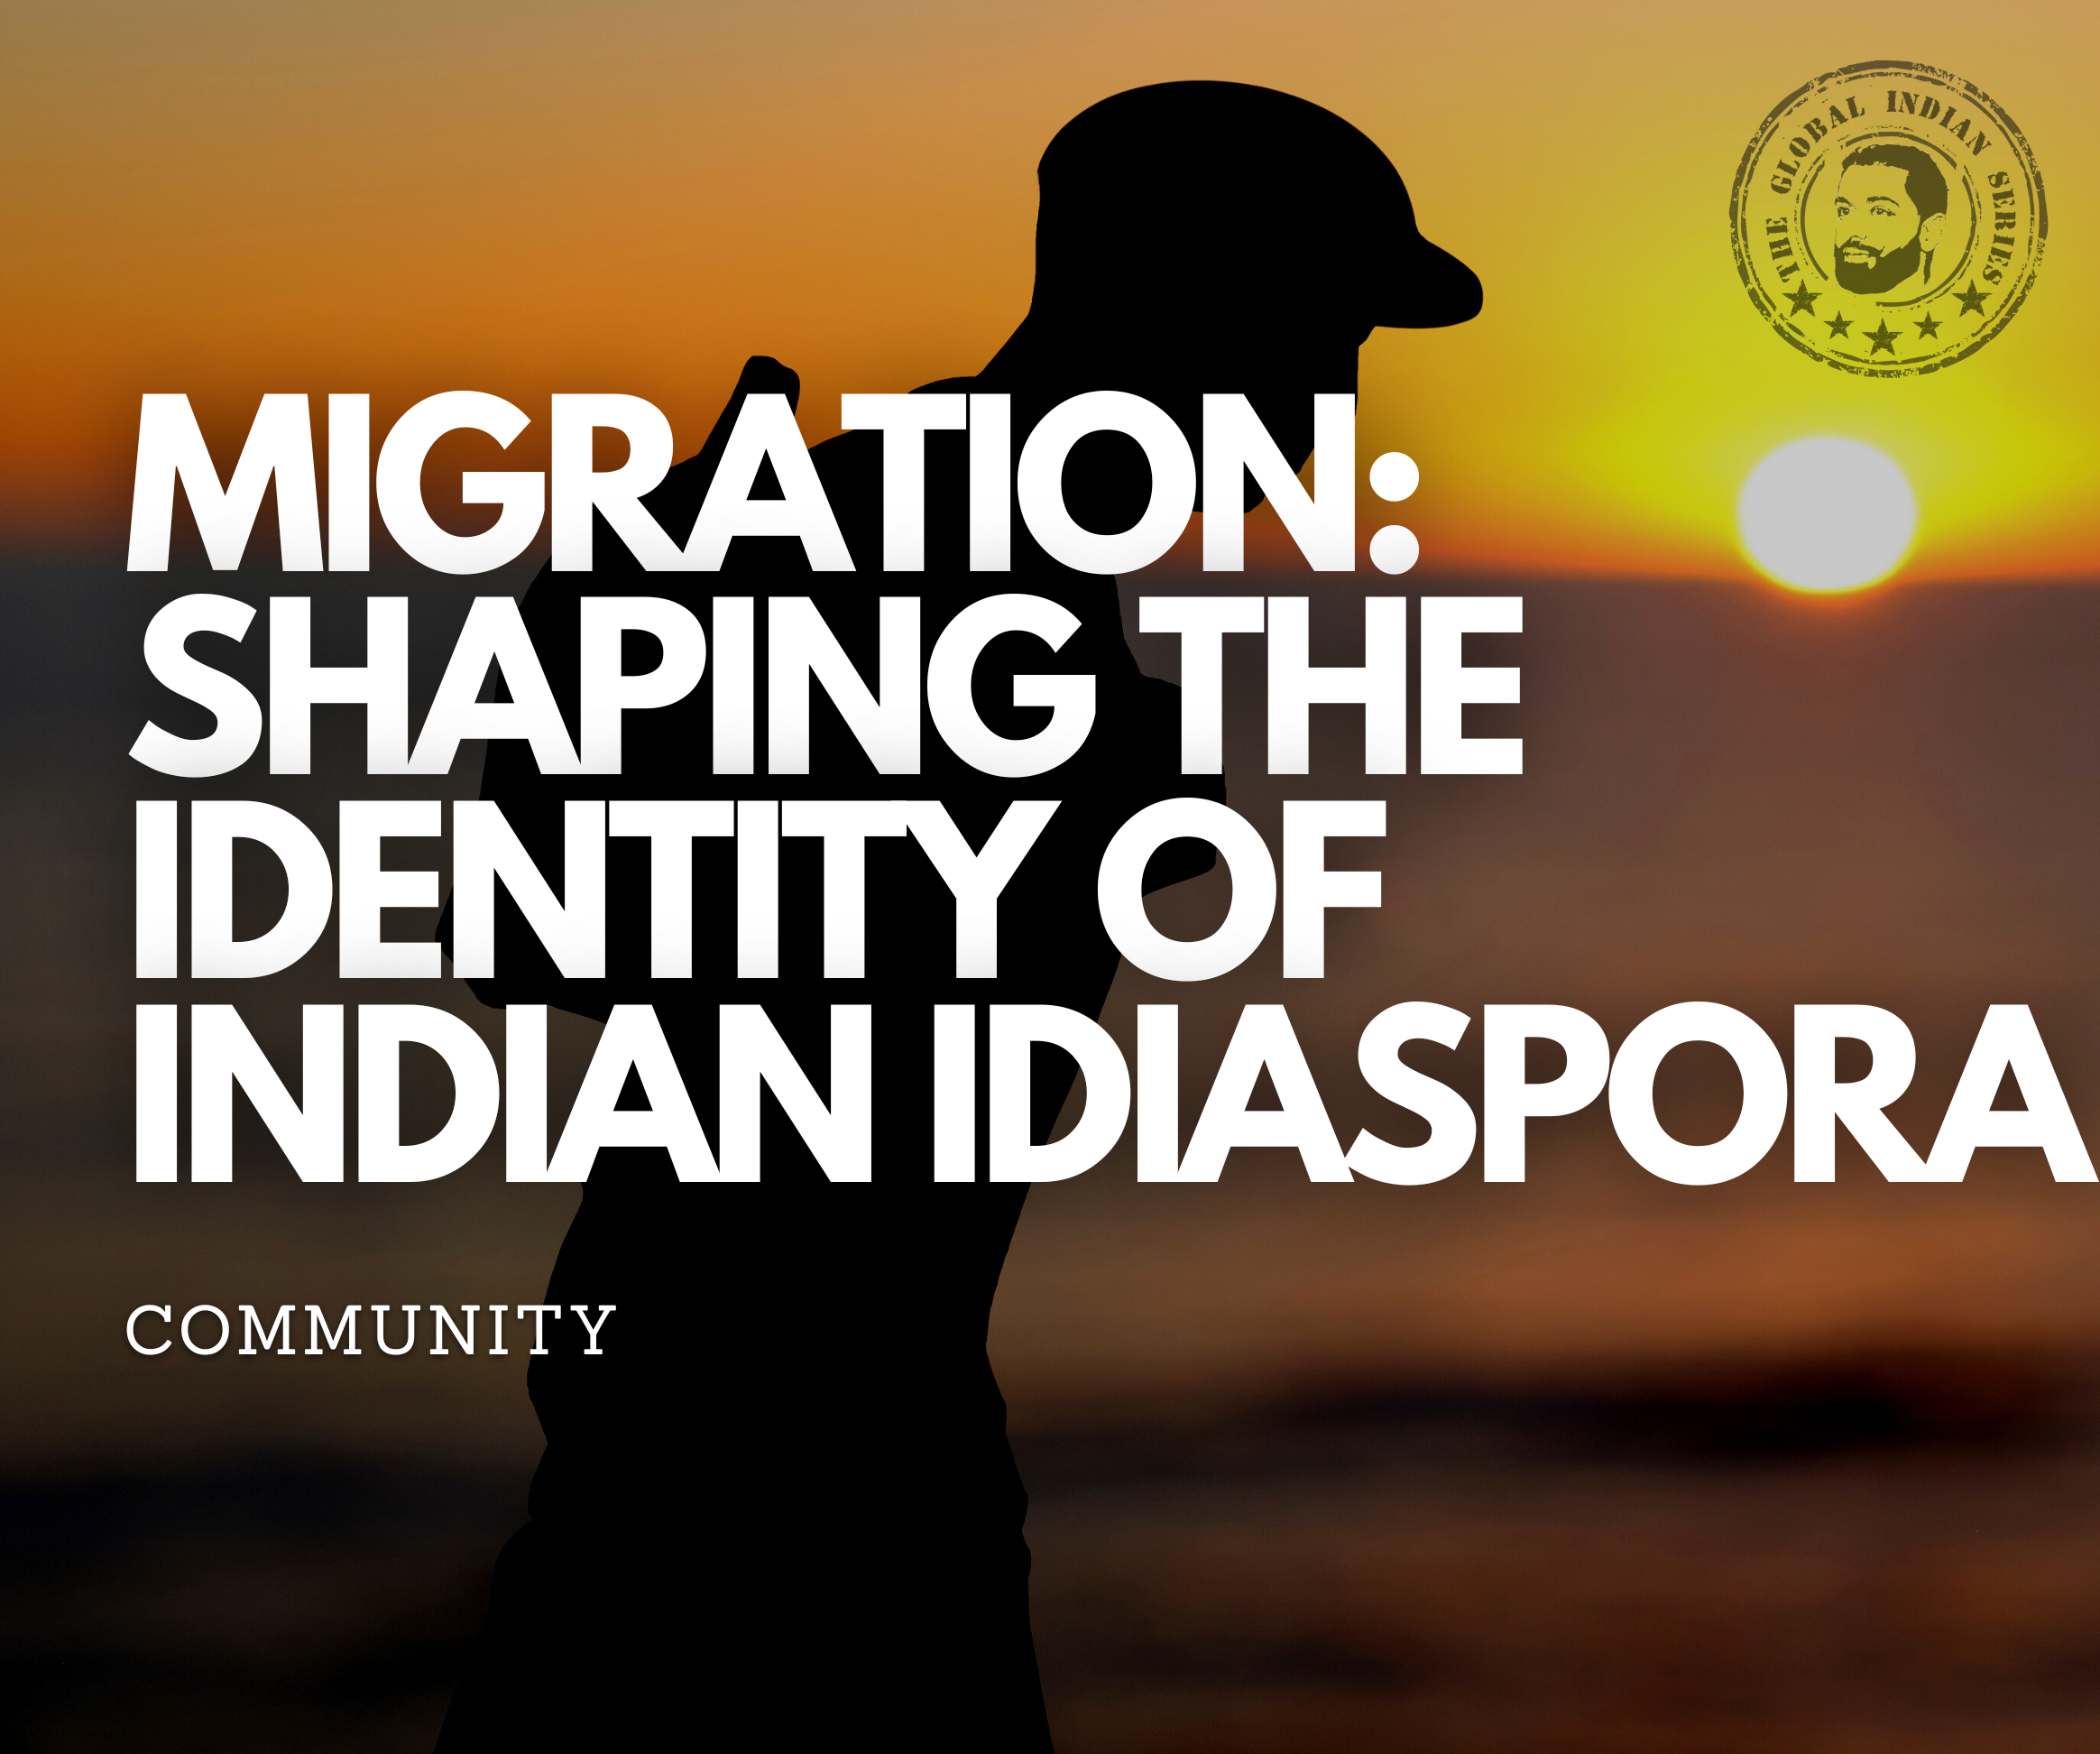 Migration: Shaping the identity of indian diaspora